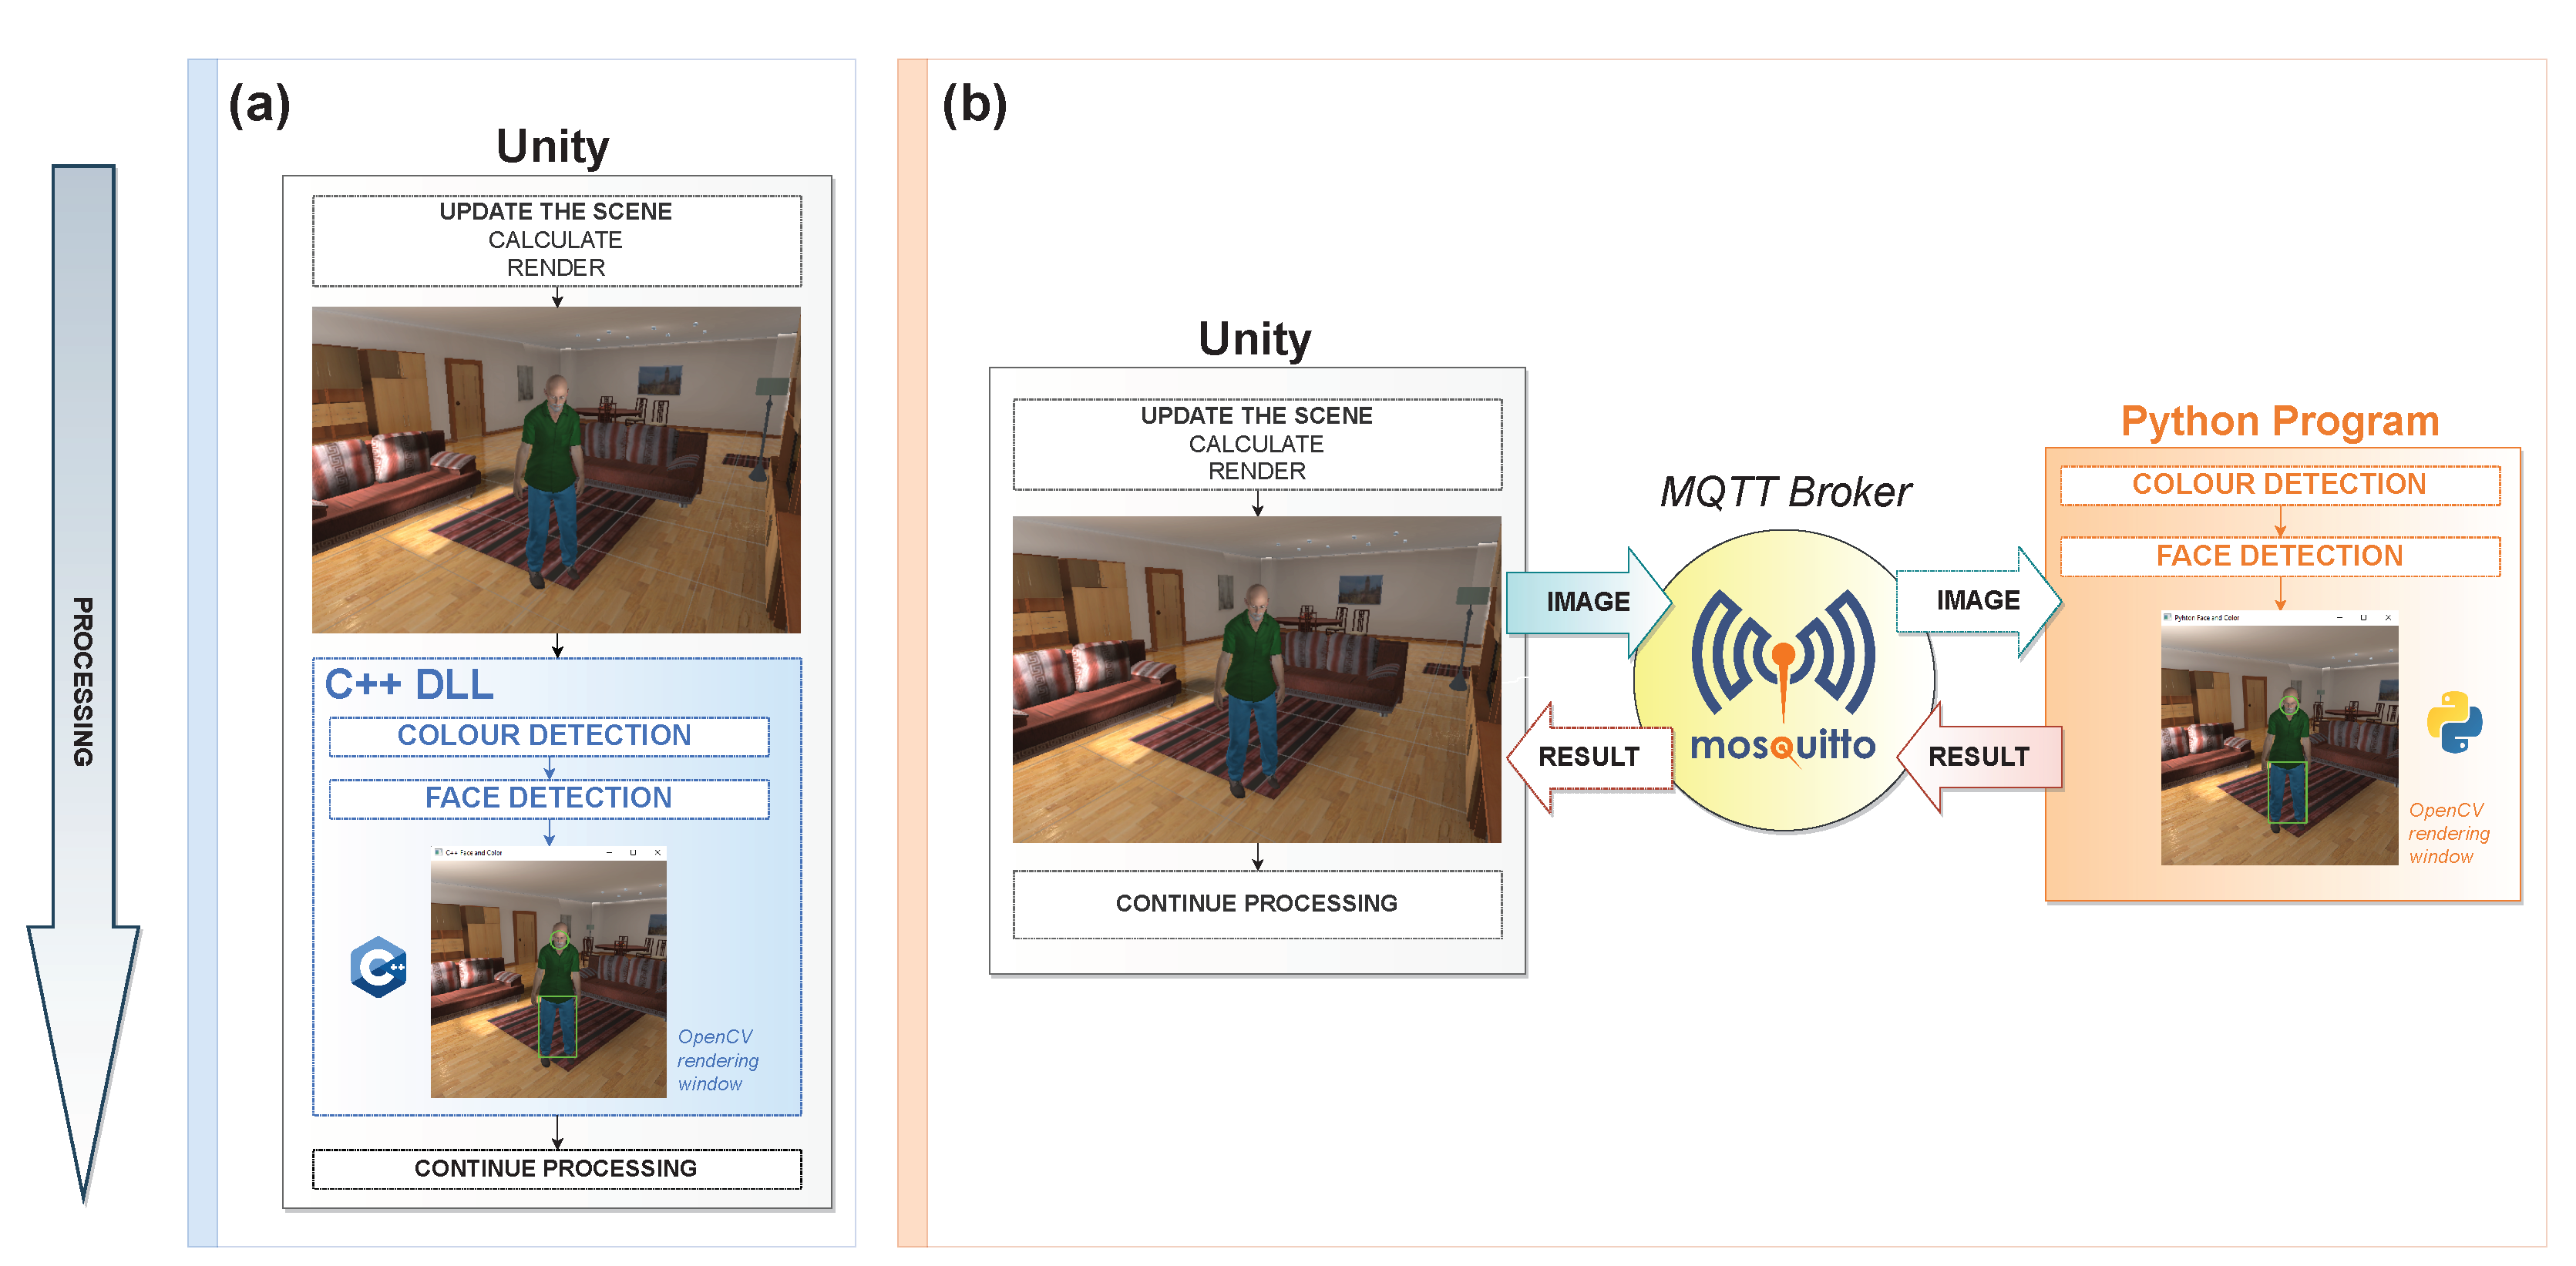 Applied Sciences | Free Full-Text | Video Processing from a Virtual  Unmanned Aerial Vehicle: Comparing Two Approaches to Using OpenCV in Unity  | HTML